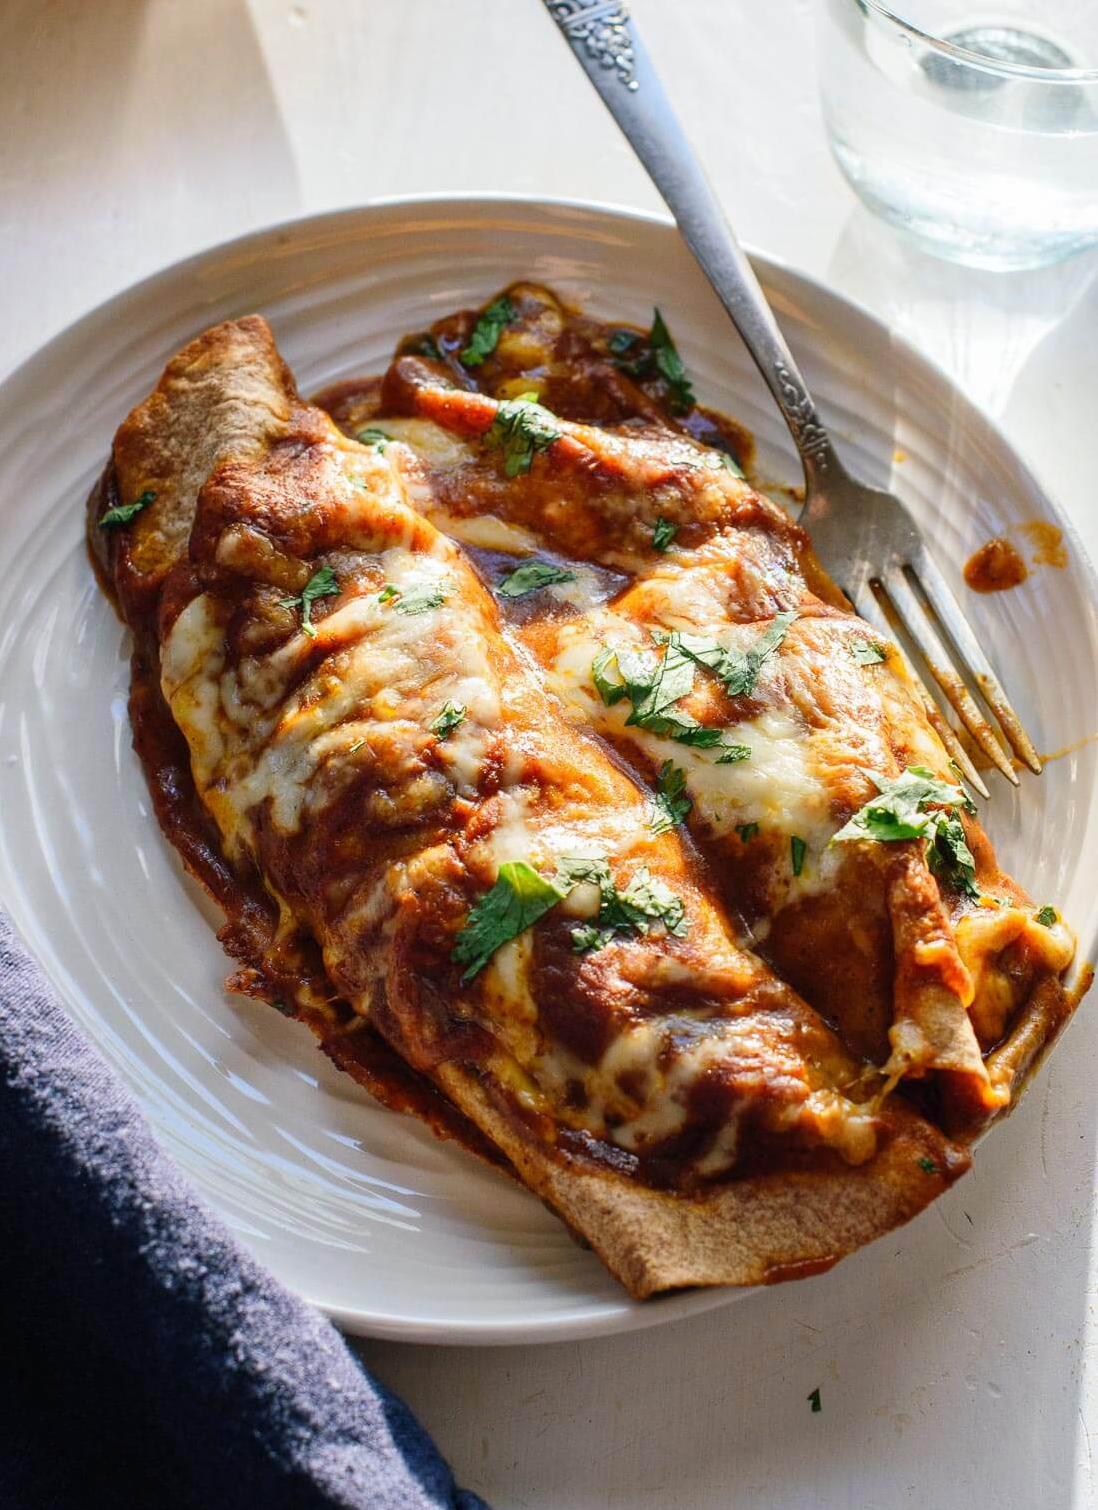  These enchiladas are loaded with flavor and packed with plant-based protein.